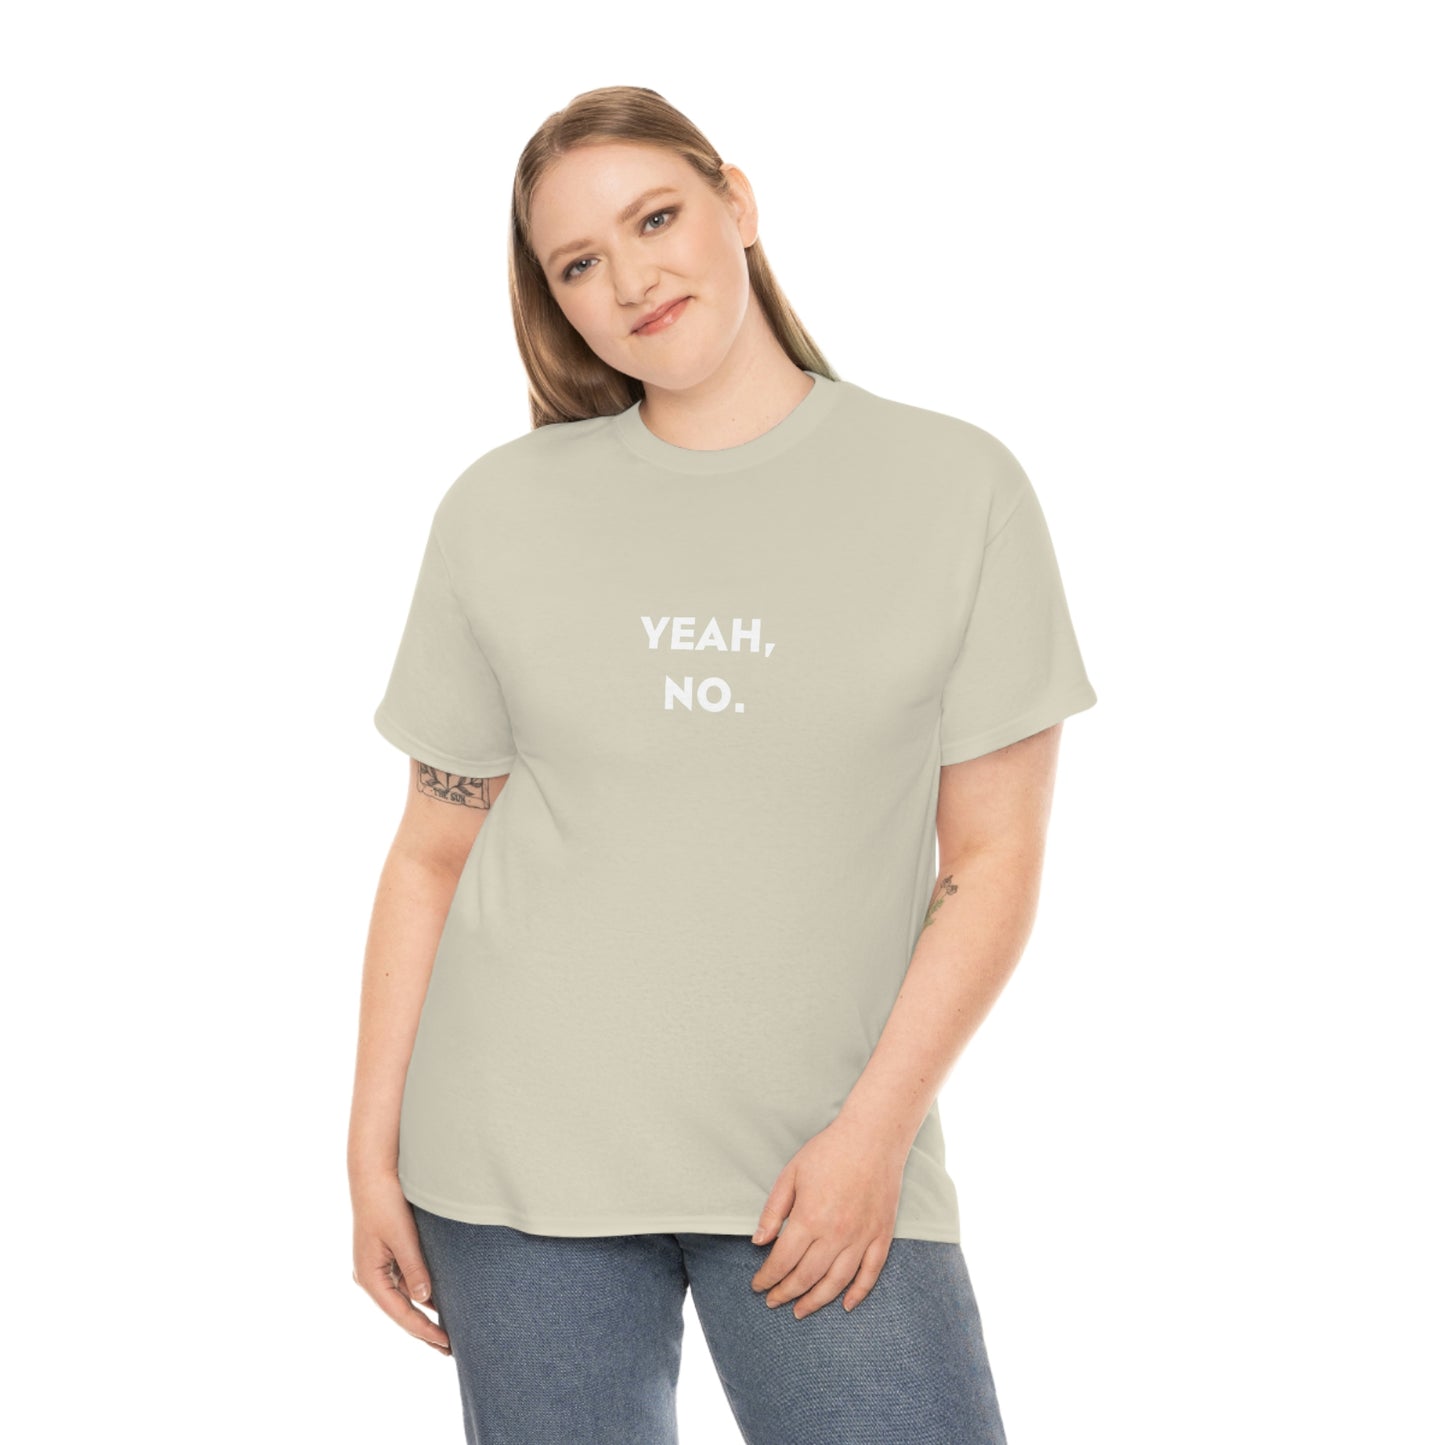 Yeah, No! Heavy Cotton T-Shirt Funny Ironic. Student Top